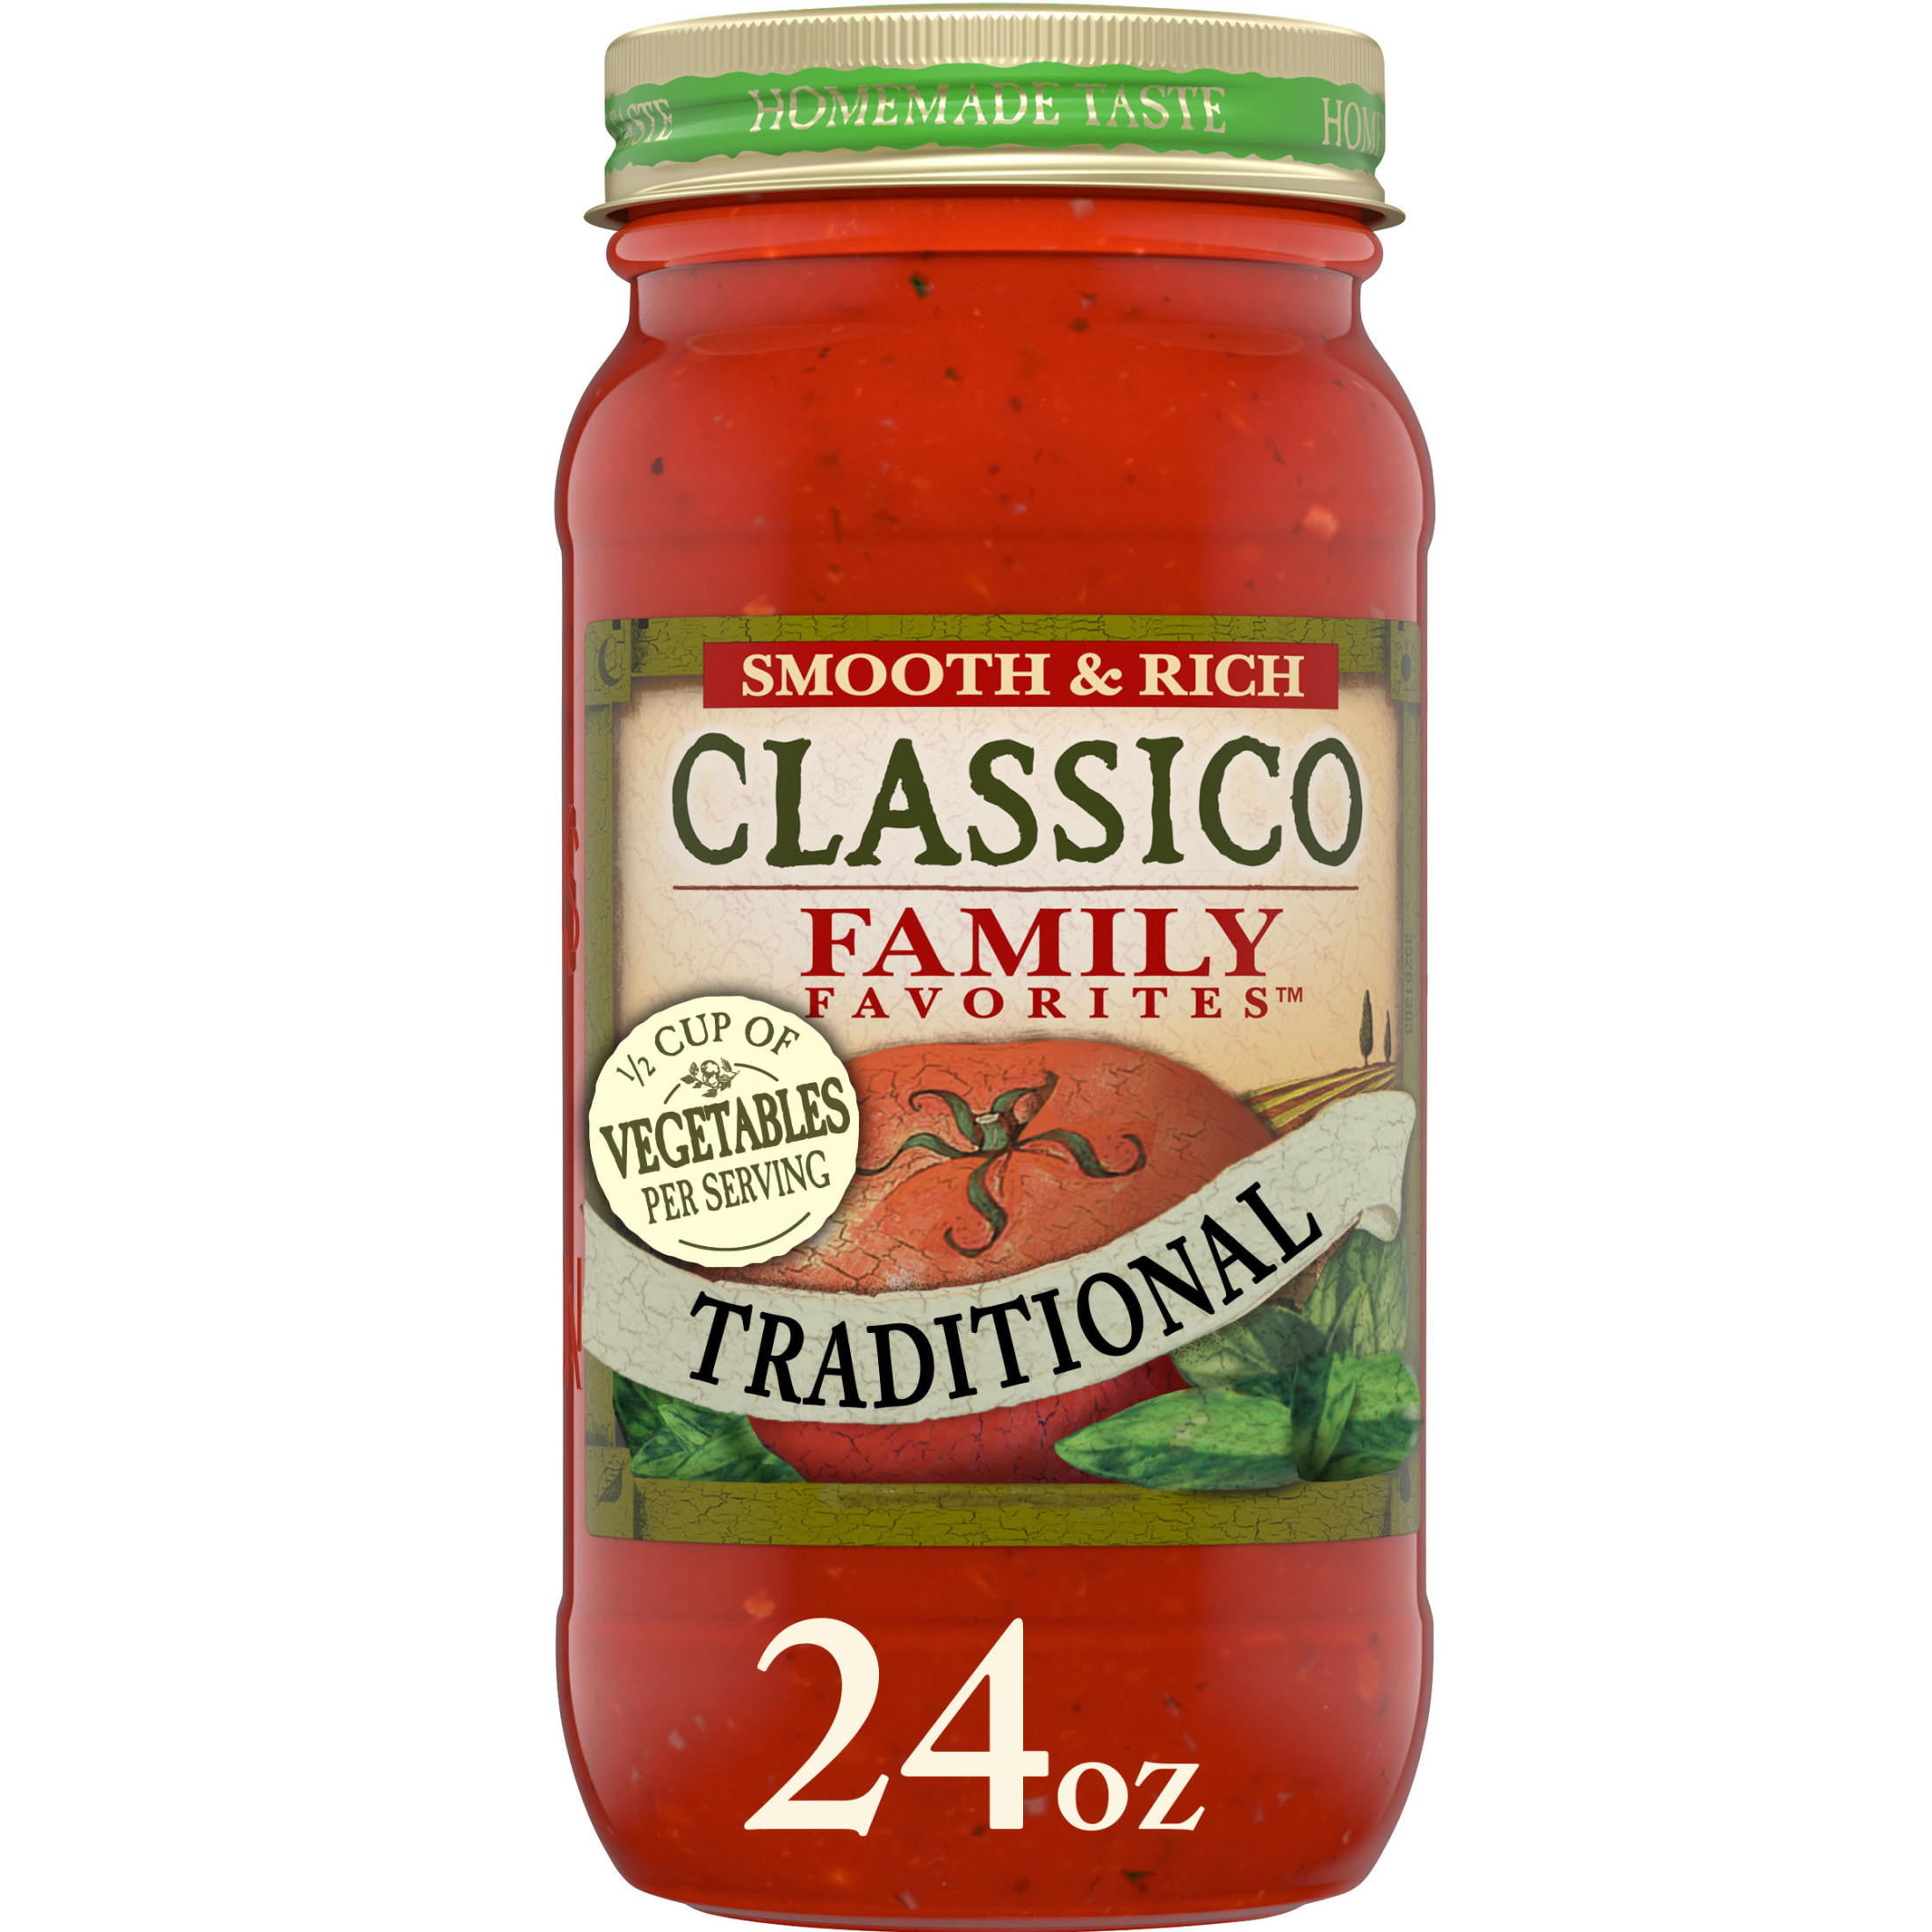 Classico Family Favorites Traditional Smooth & Rich Spaghetti Pasta Sauce, 24 oz. Jar - image 1 of 13